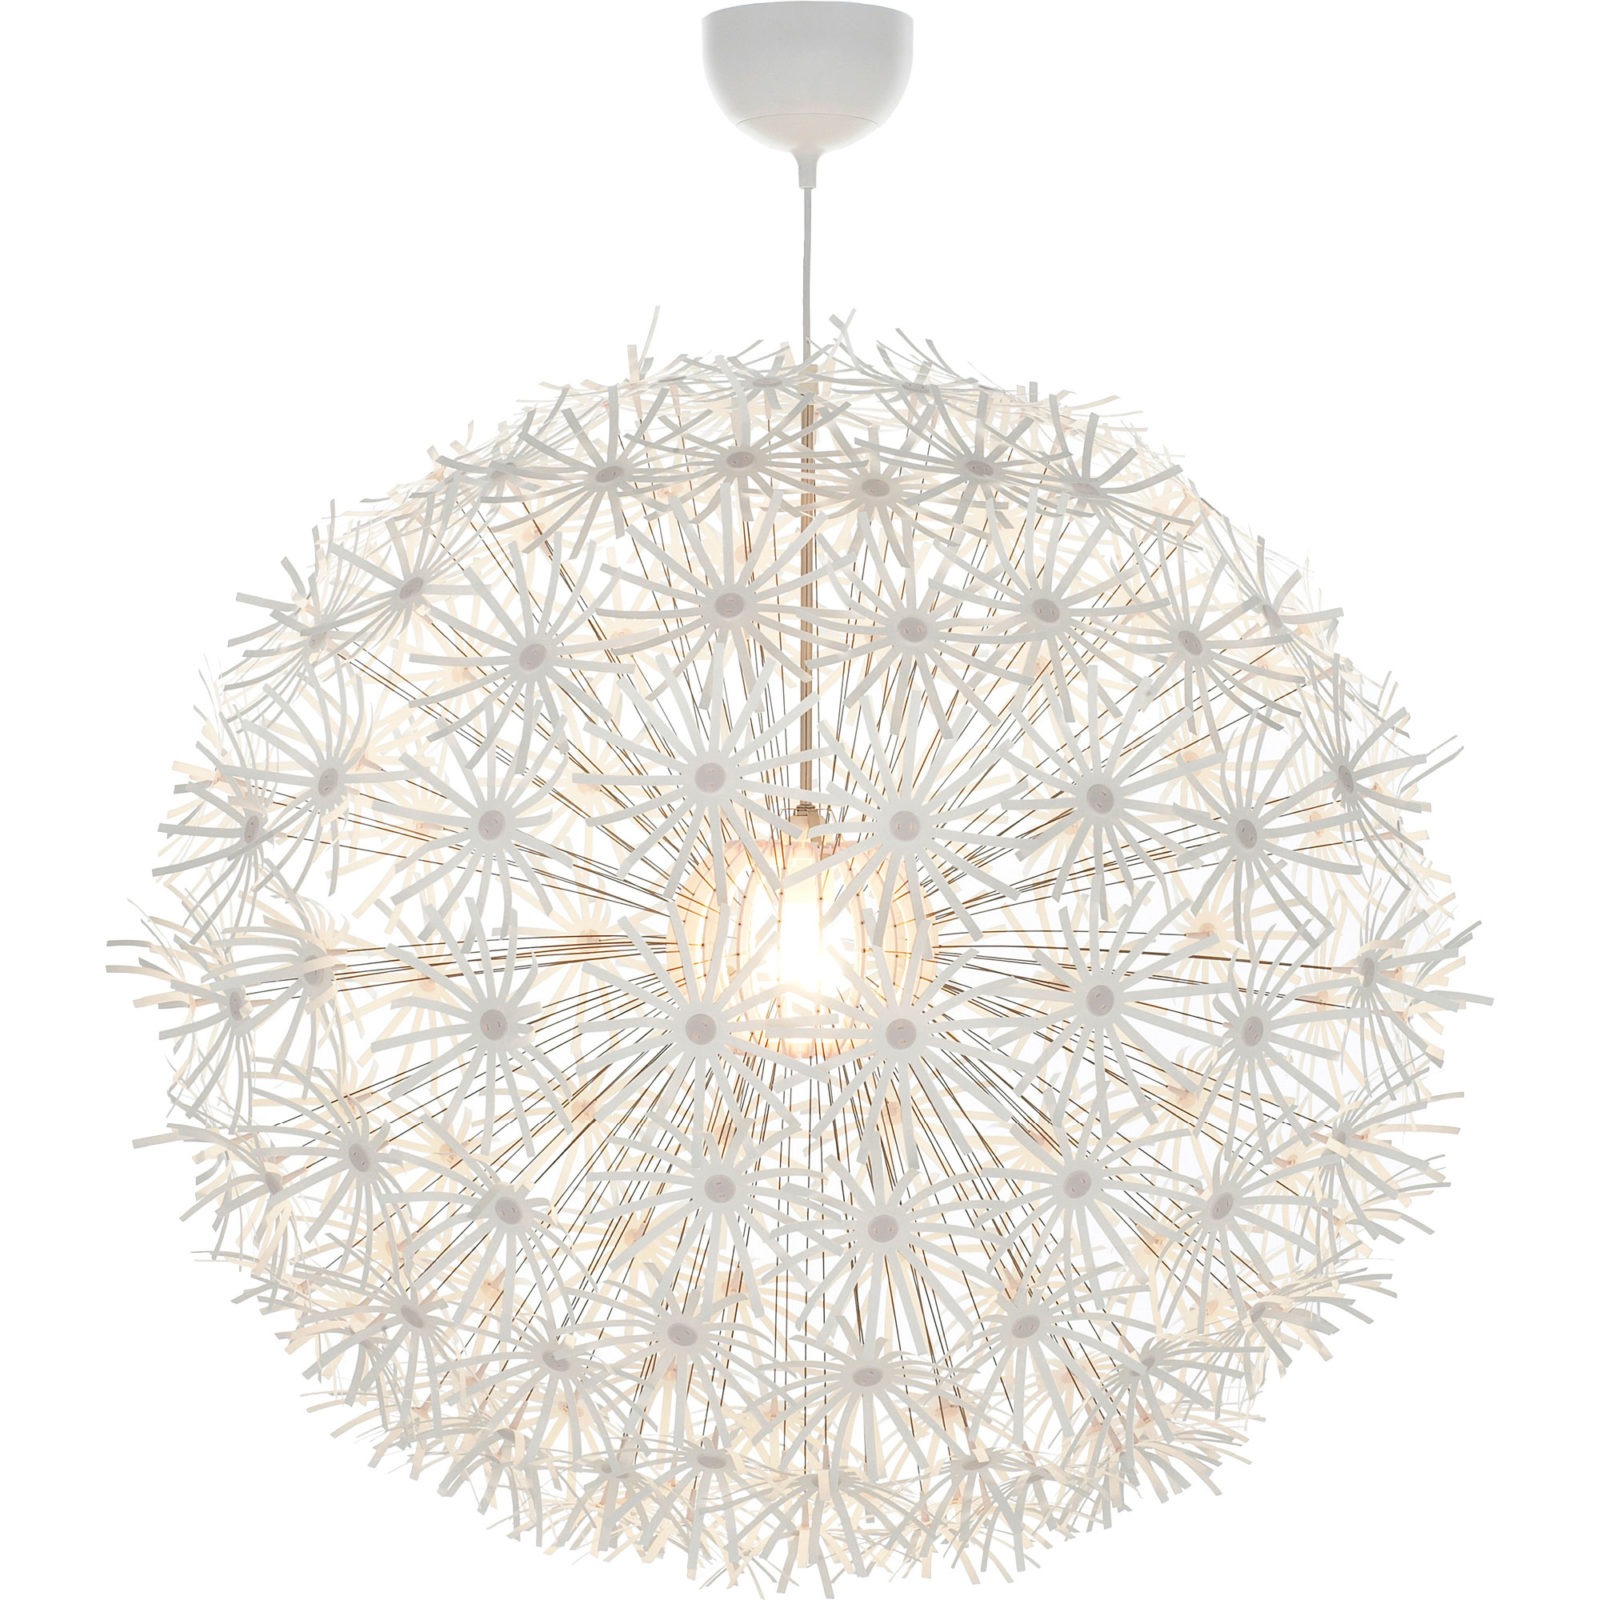 Lamp that looks like a spherical dandelion clock about to be spread by the wind, IKEA PS MASKROS.